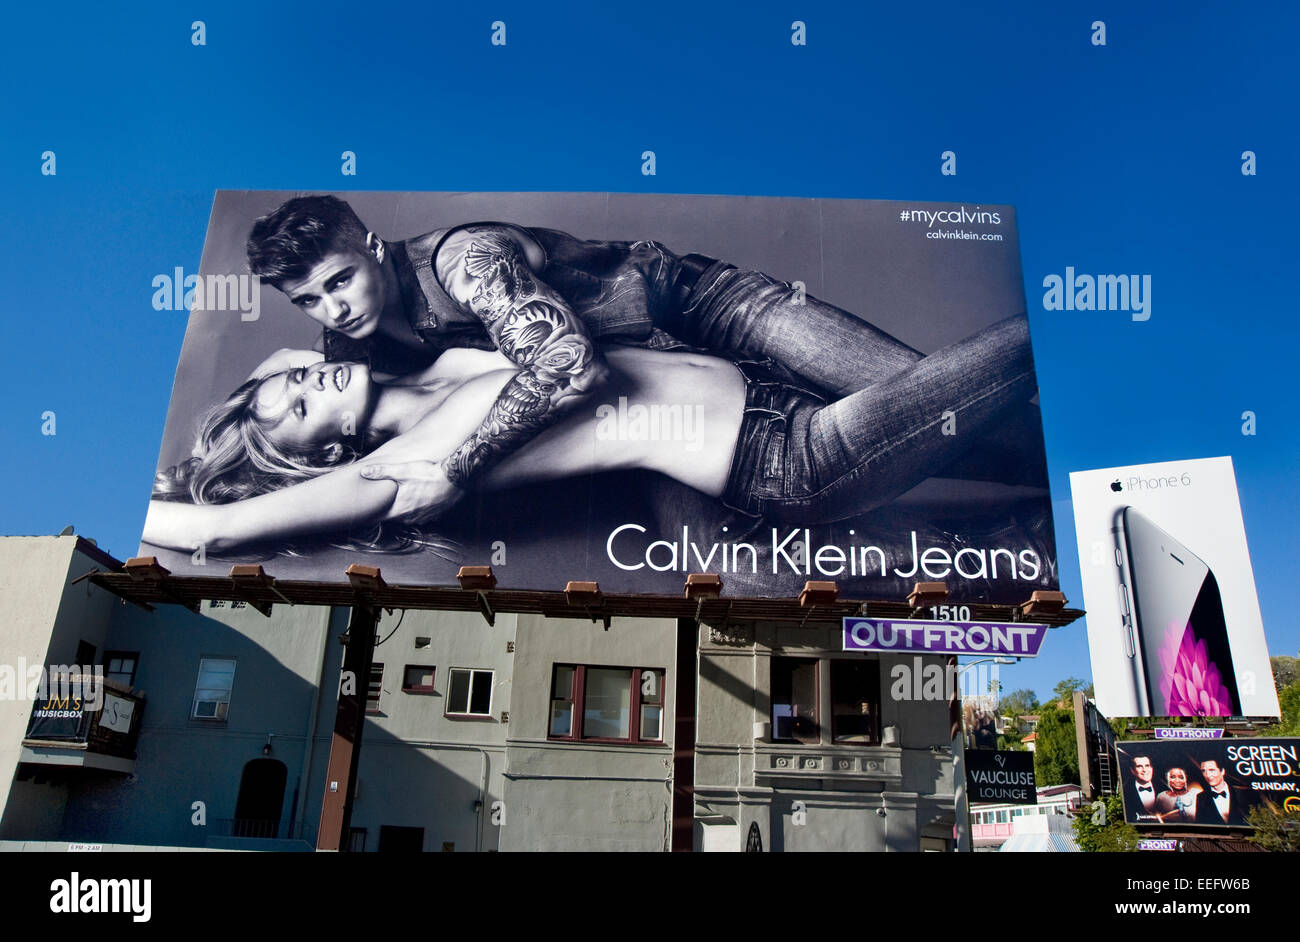 Justin Bieber's billboard for Calvin Klein jeans on the Sunset Strip in  West Hollywood Stock Photo - Alamy